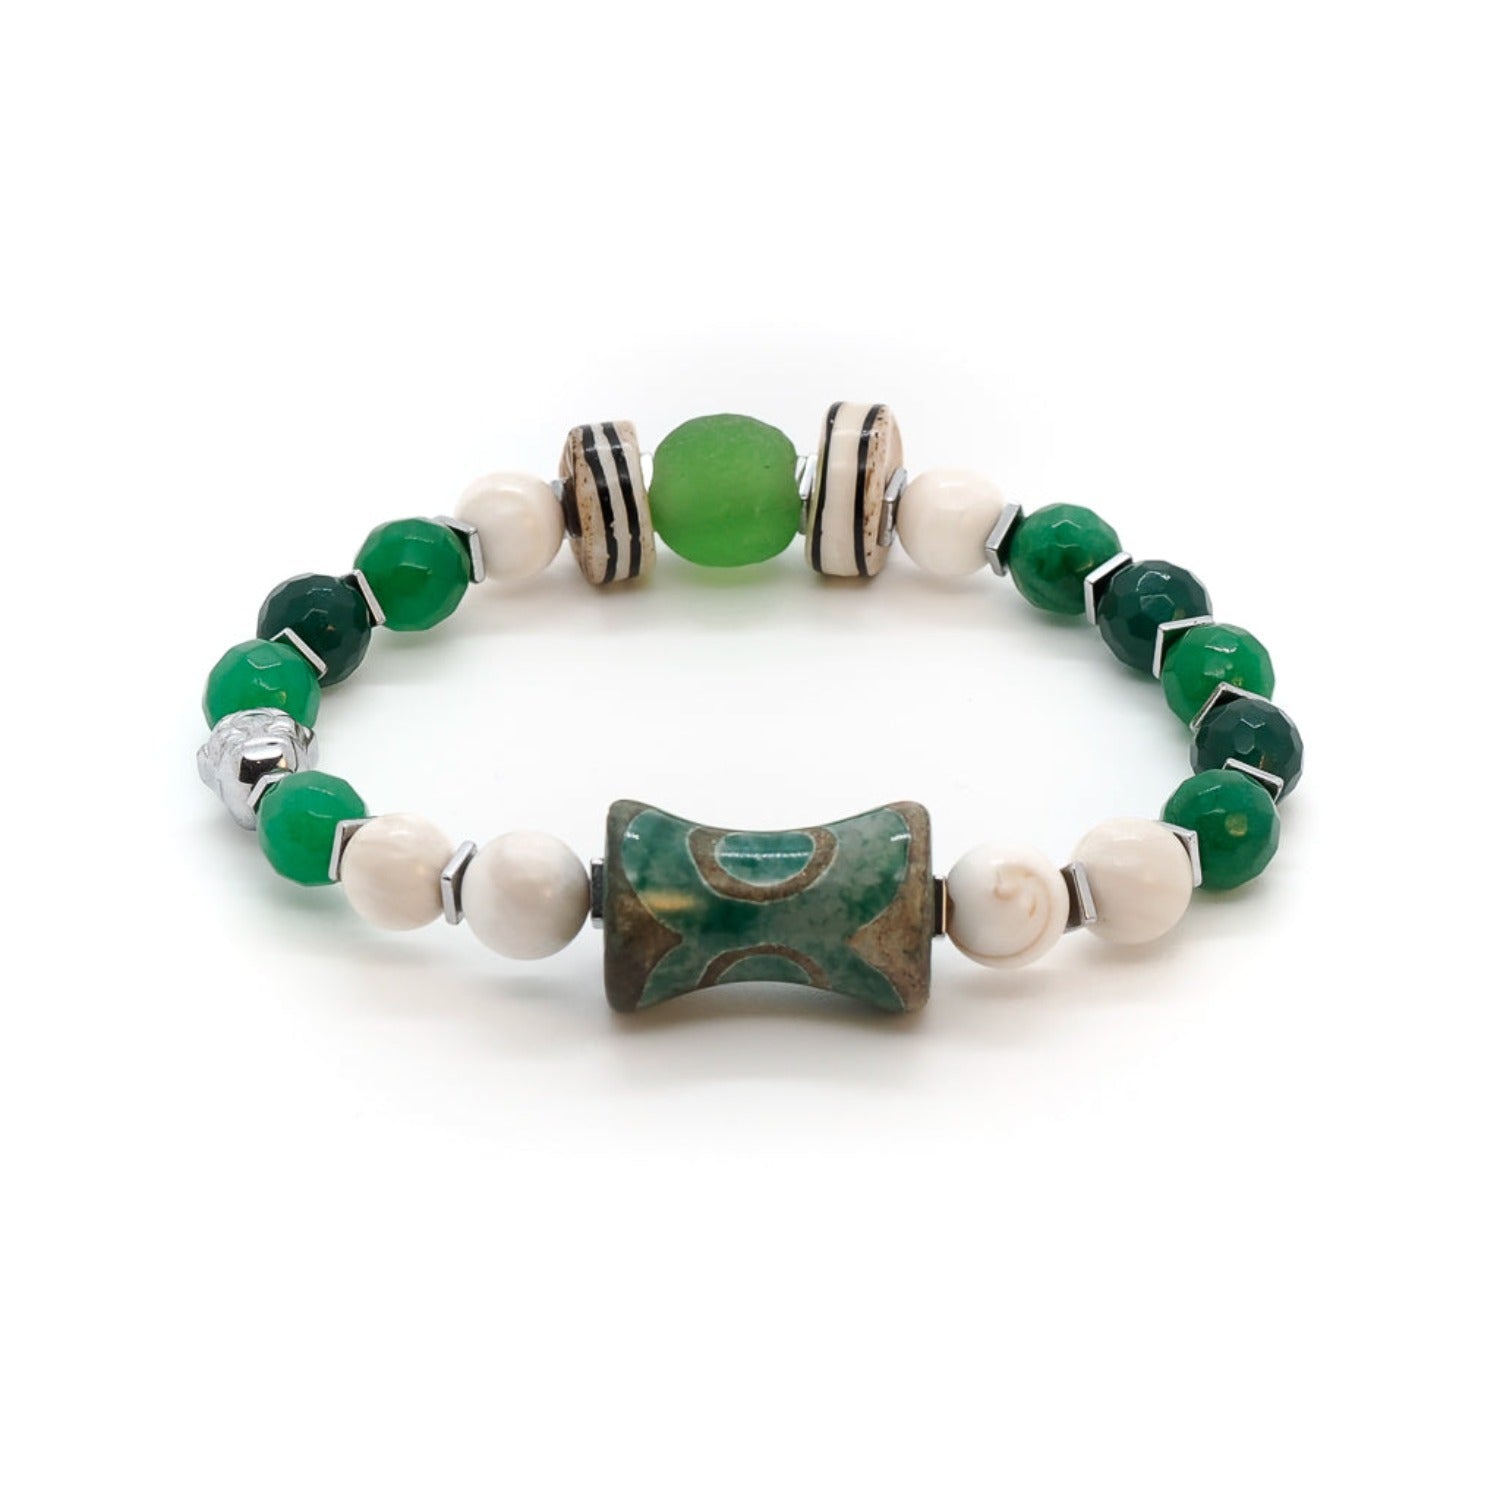 Handmade bracelet featuring a silver color Hematite stone Buddha bead surrounded by White Nepal stone beads, Green Jade stone beads, and Nepal striped meditation beads, radiating a sense of mindfulness and spiritual well-being.